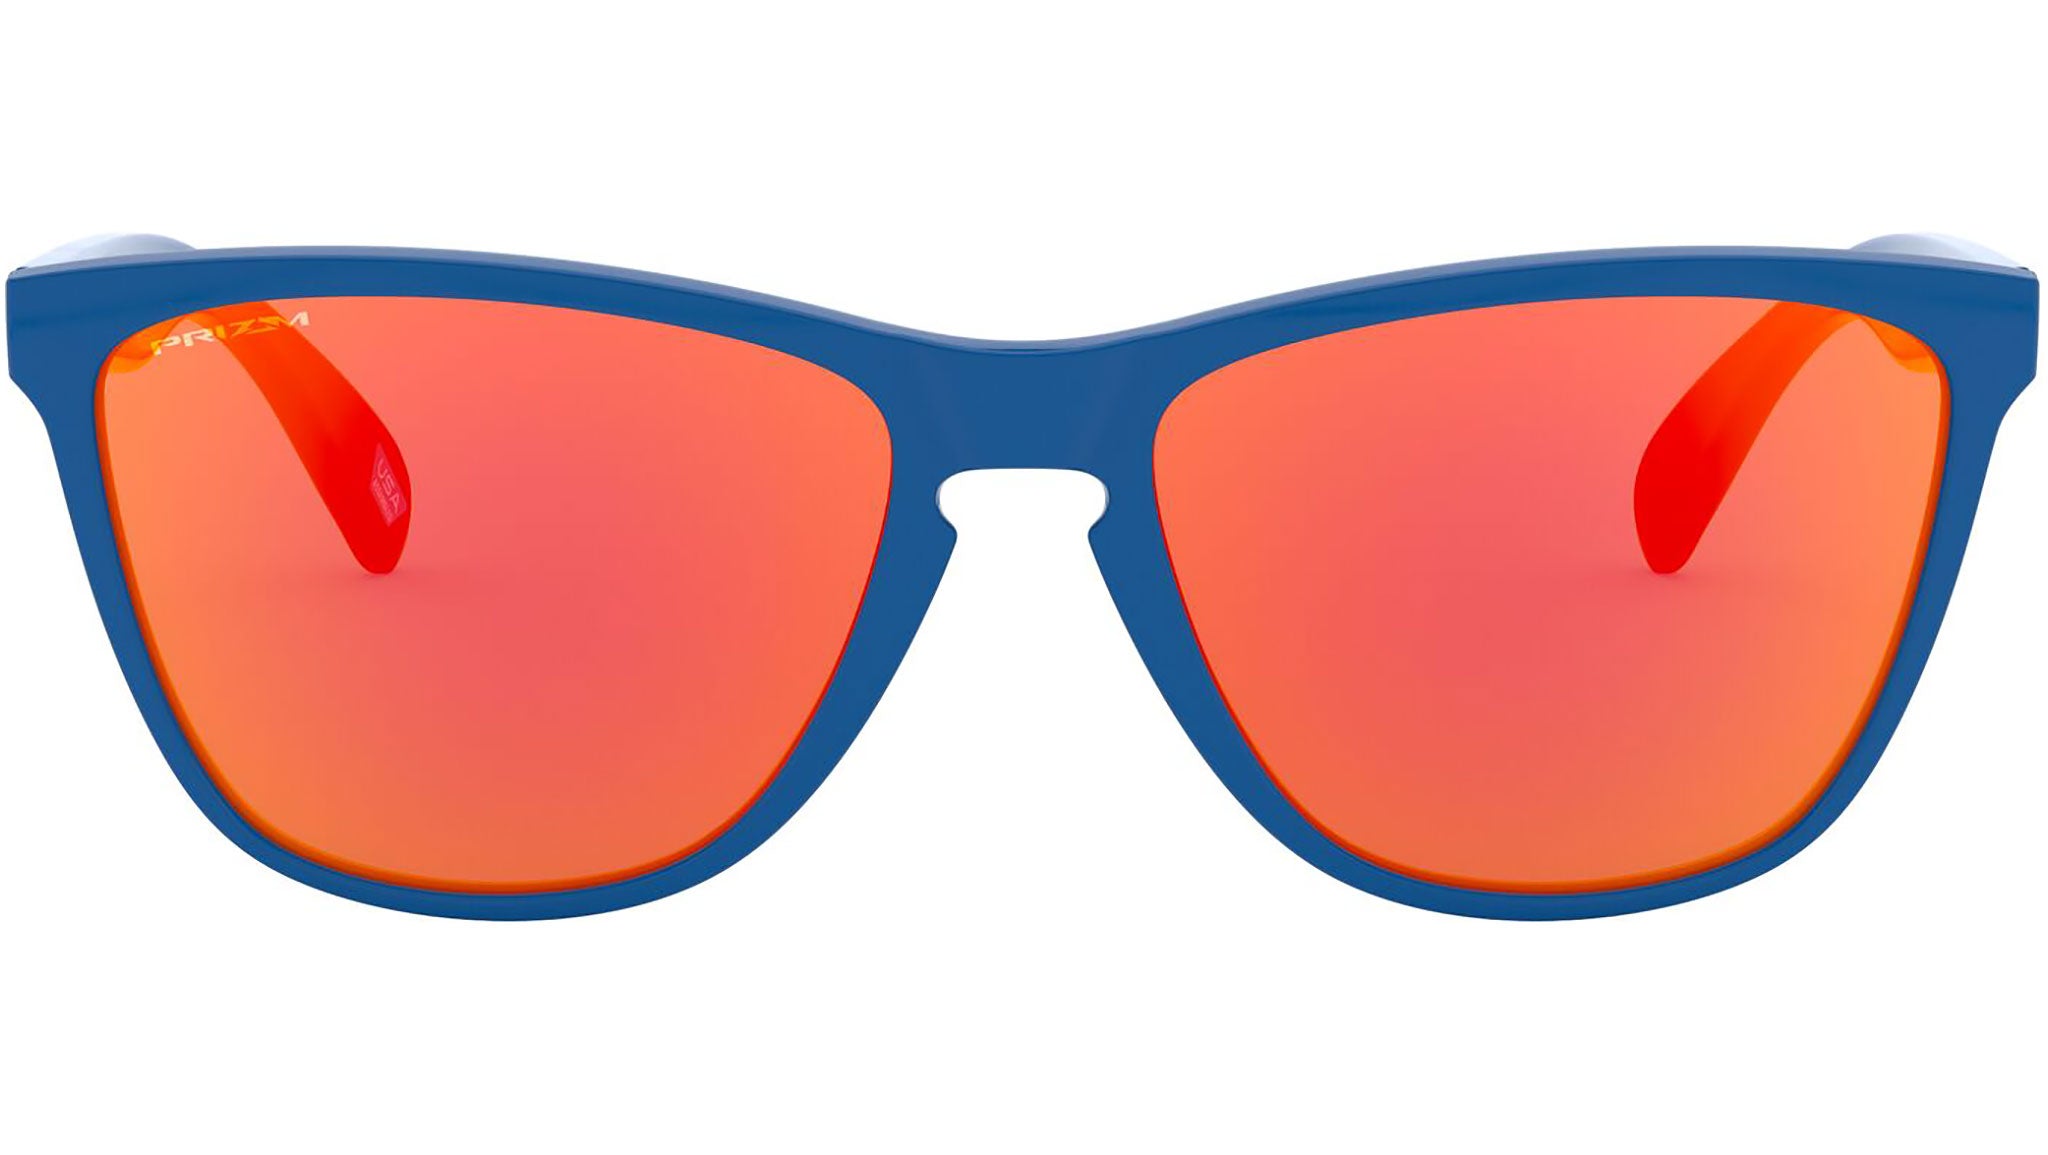 Frogskins 35Th OO9444 04 primary blue – 